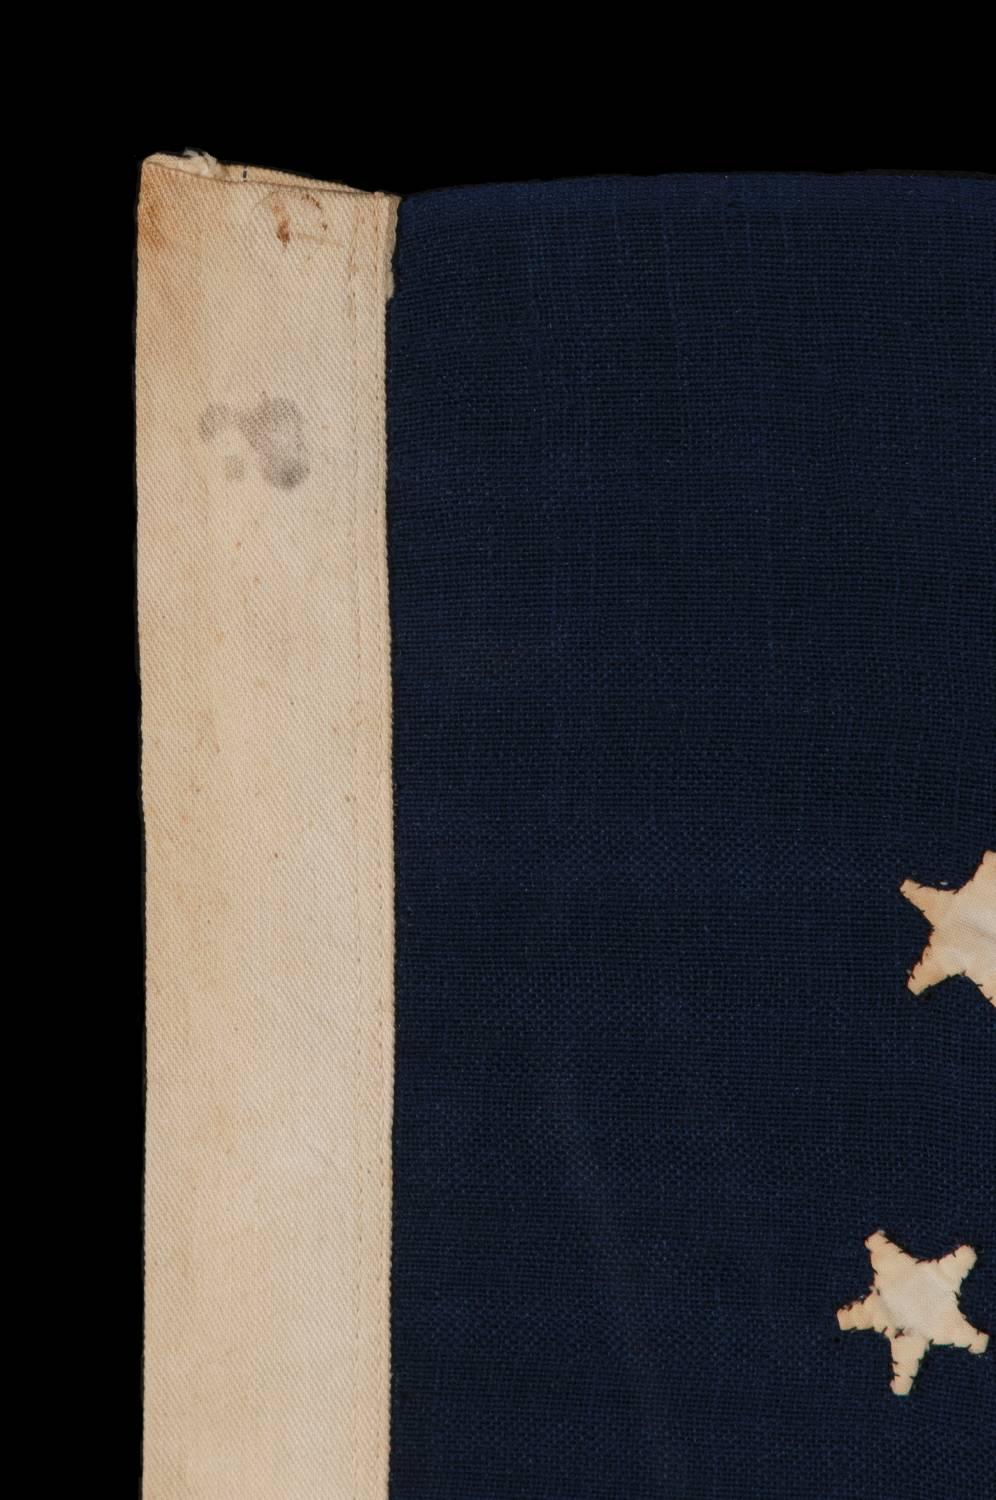 Mid-19th Century 13 Star Flag with Stars in the 3rd Maryland Pattern